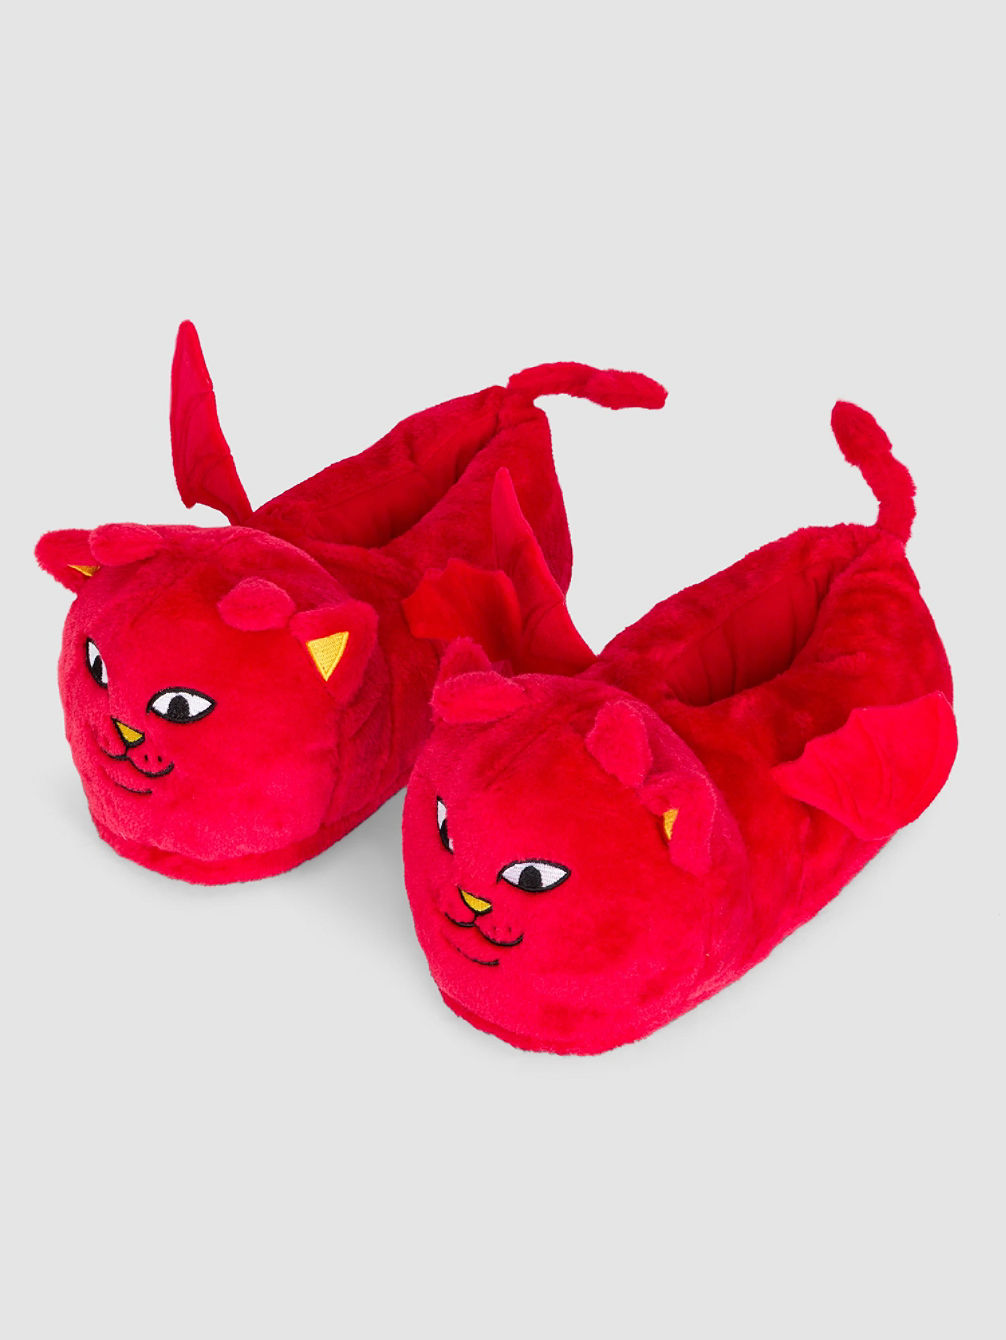 Devil Plush Slippers Sand&aacute;ly